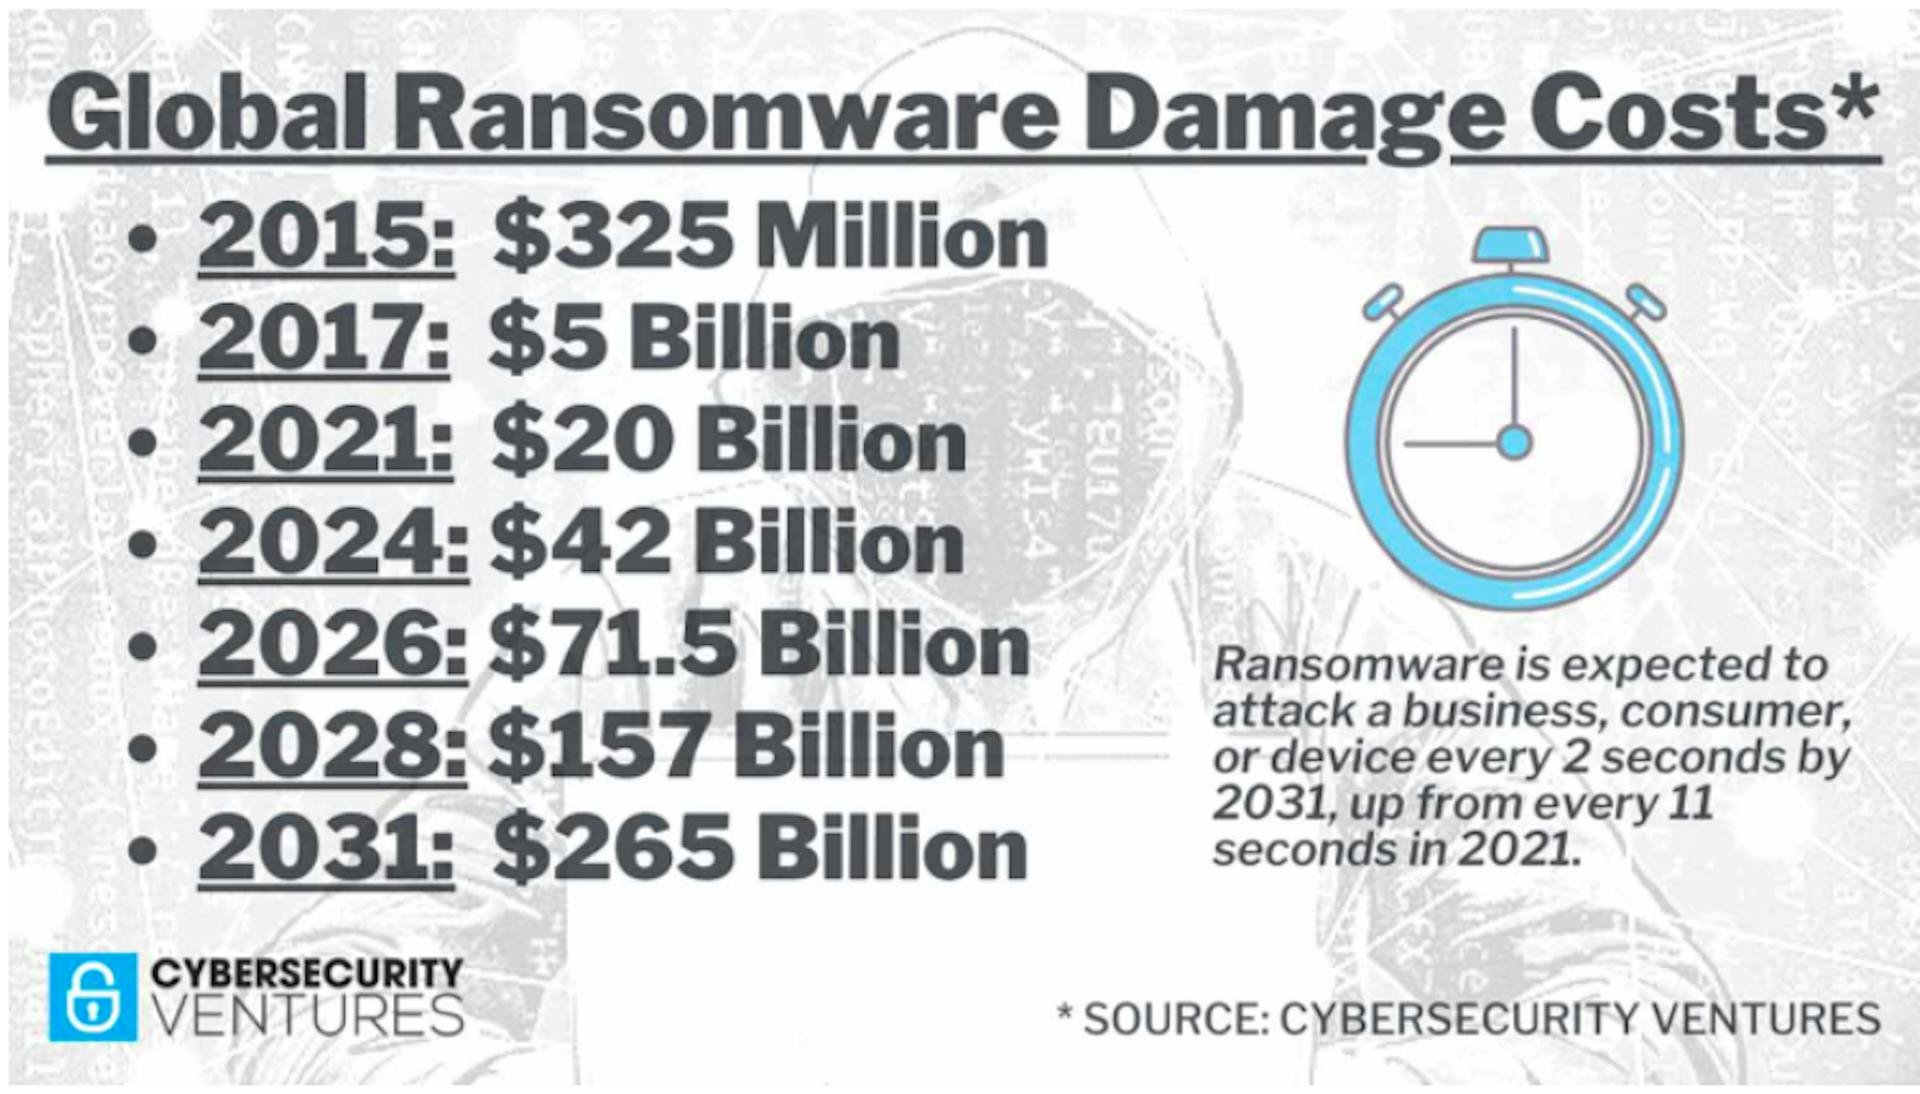 Figure-16: Source (https://cybersecurityventures.com/global-ransomware-damage-costs-predicted-to-reach-250-billion-usd-by-2031/)